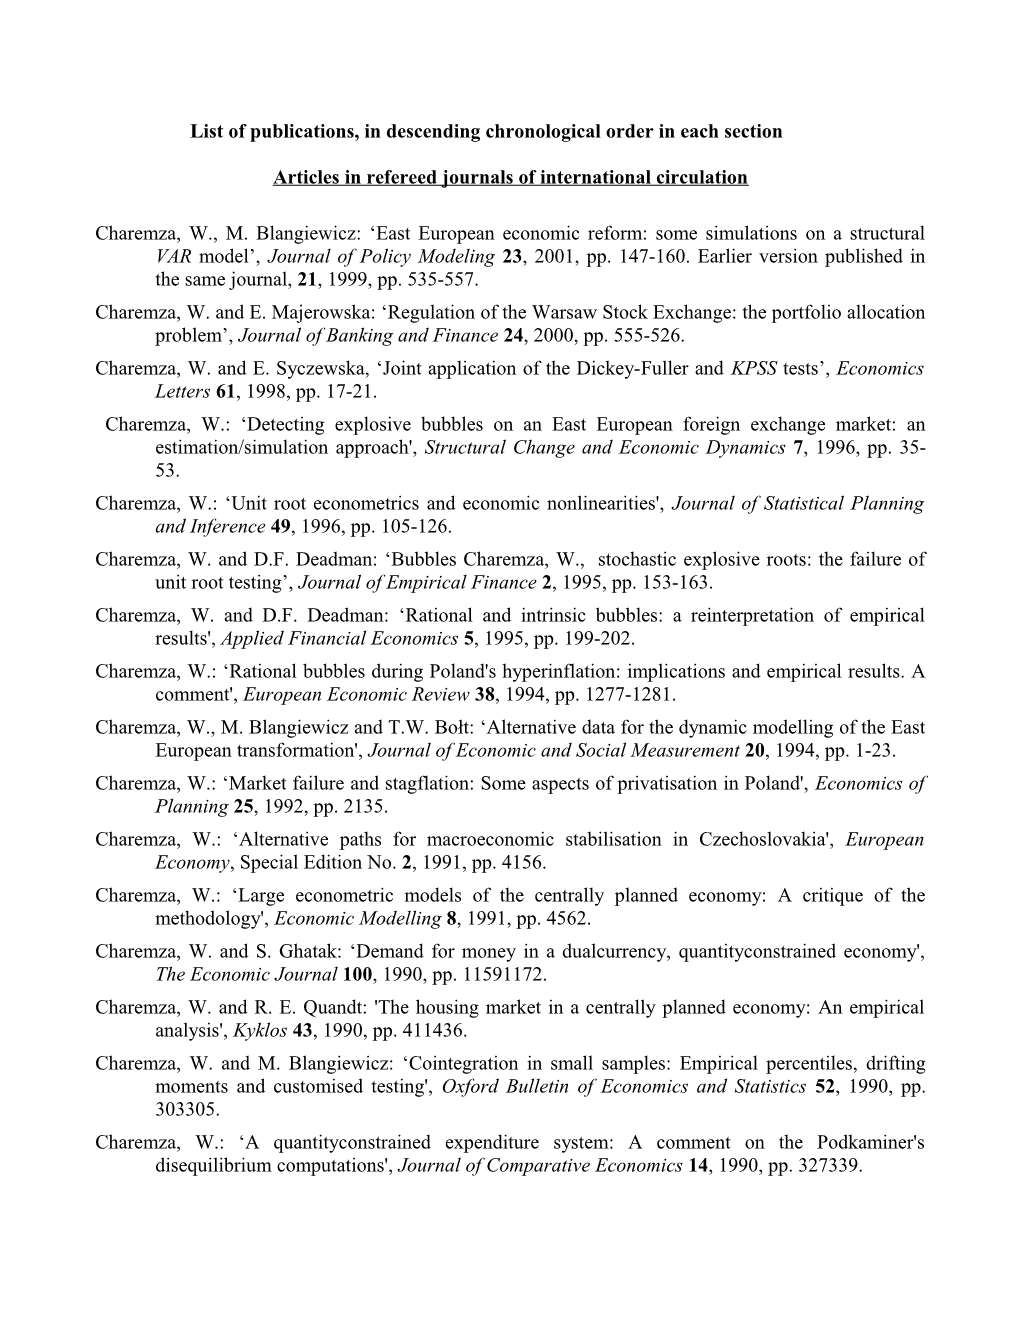 List of Publications, in Descending Chronological Order in Each Section